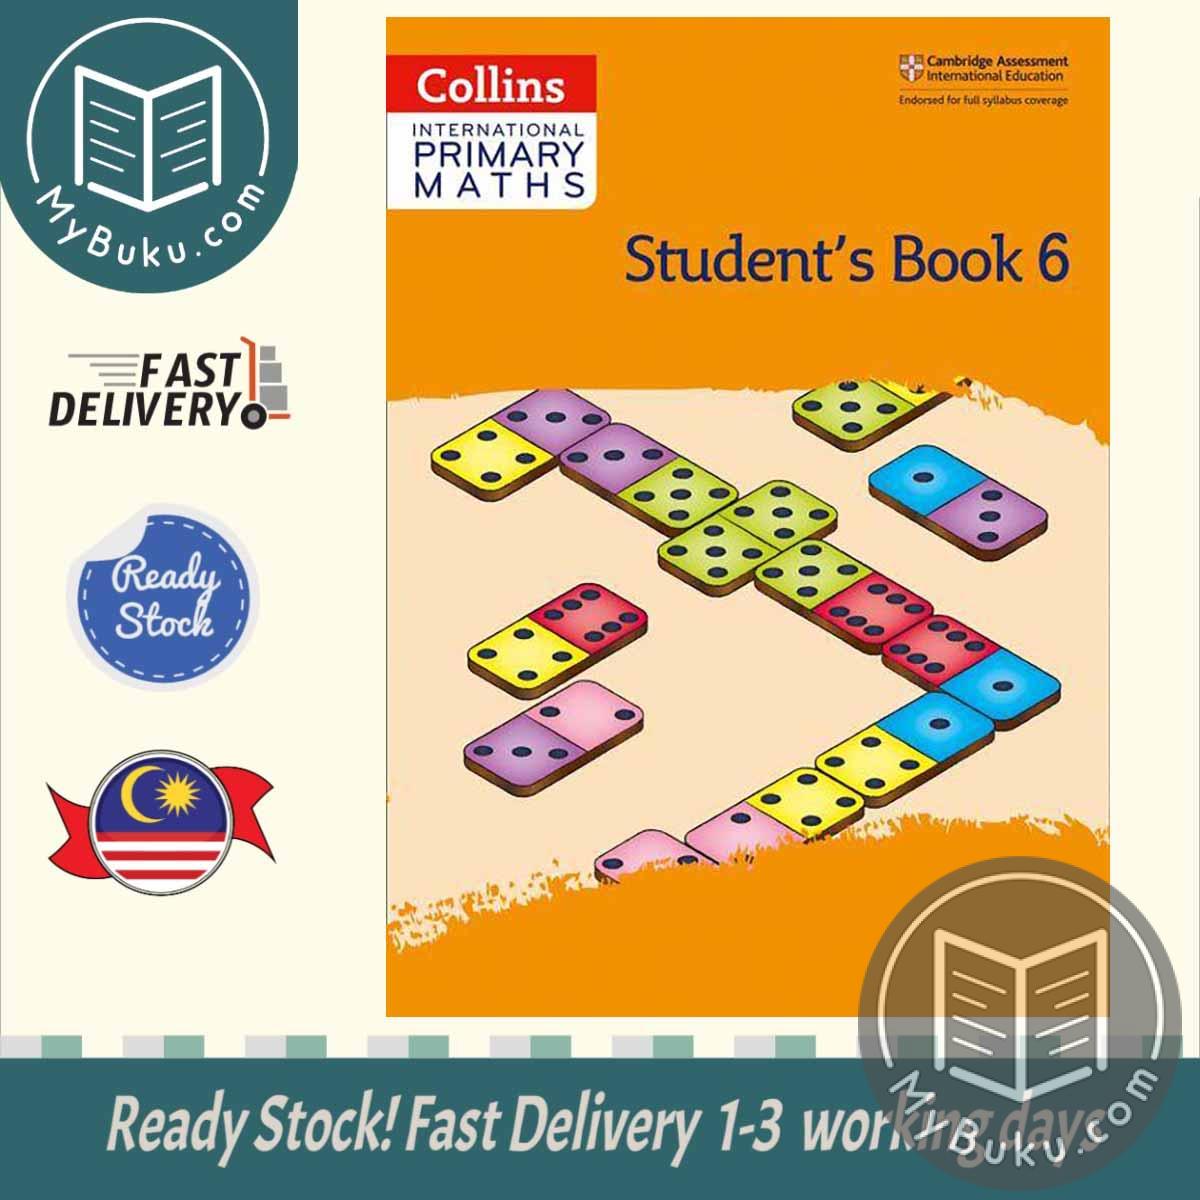 Collins International Primary Maths Student's Book: Stage 6 - Paul Hodge - 9780008369446 - HarperCollins